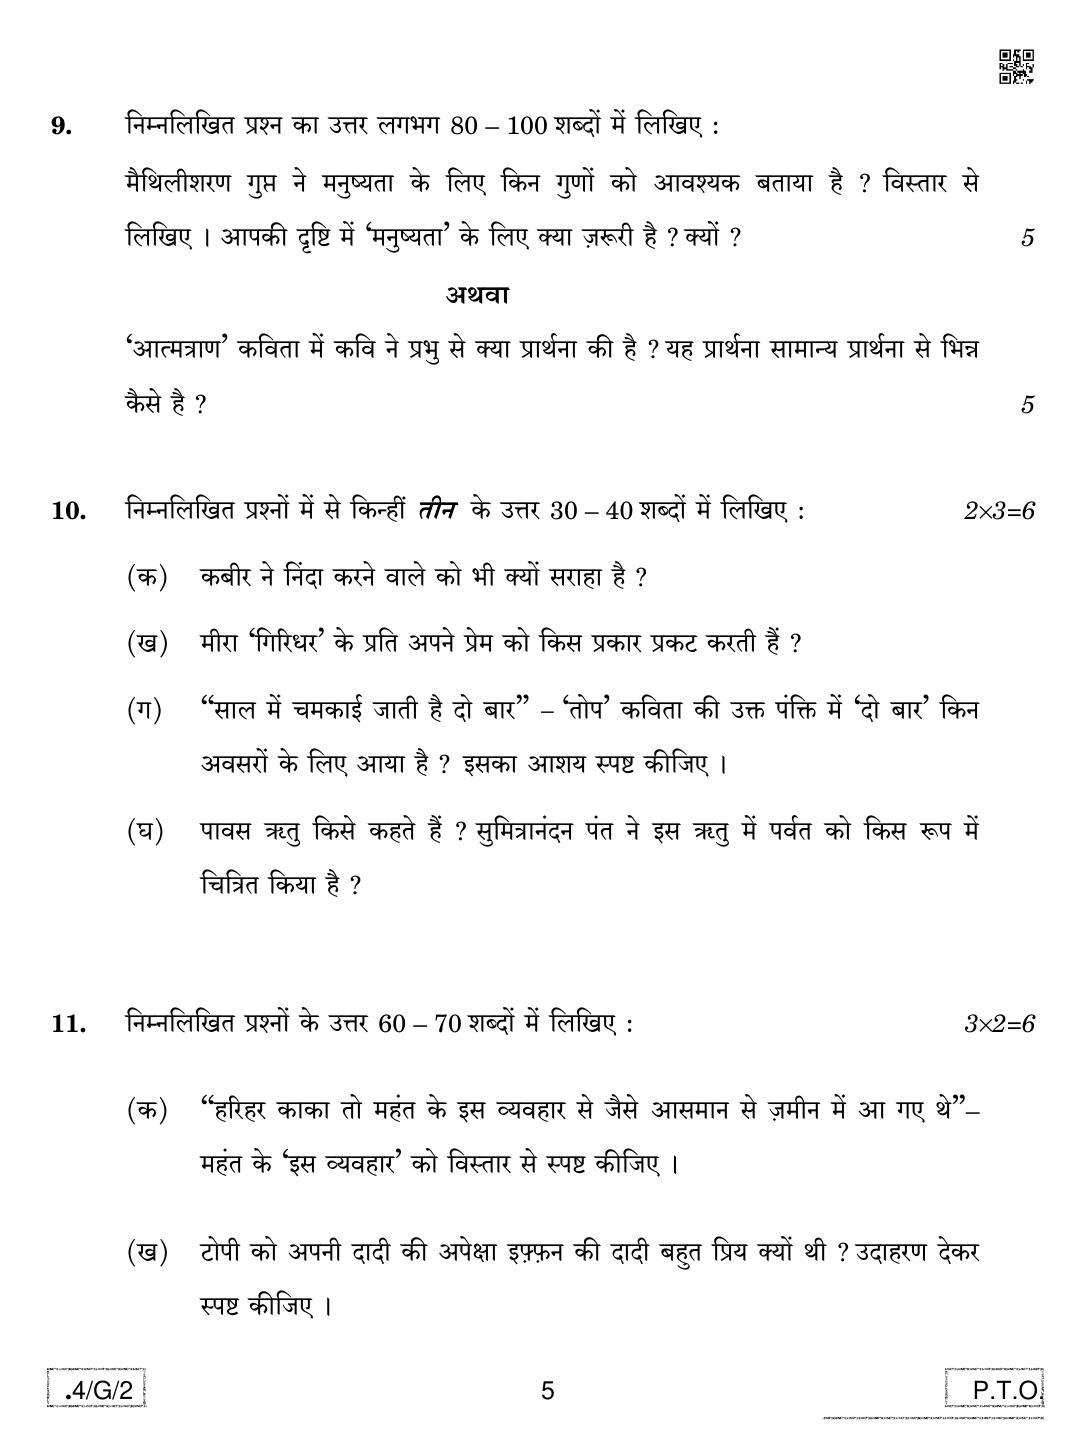 CBSE Class 10 4-C-2 Hindi B 2020 Compartment Question Paper - Page 5